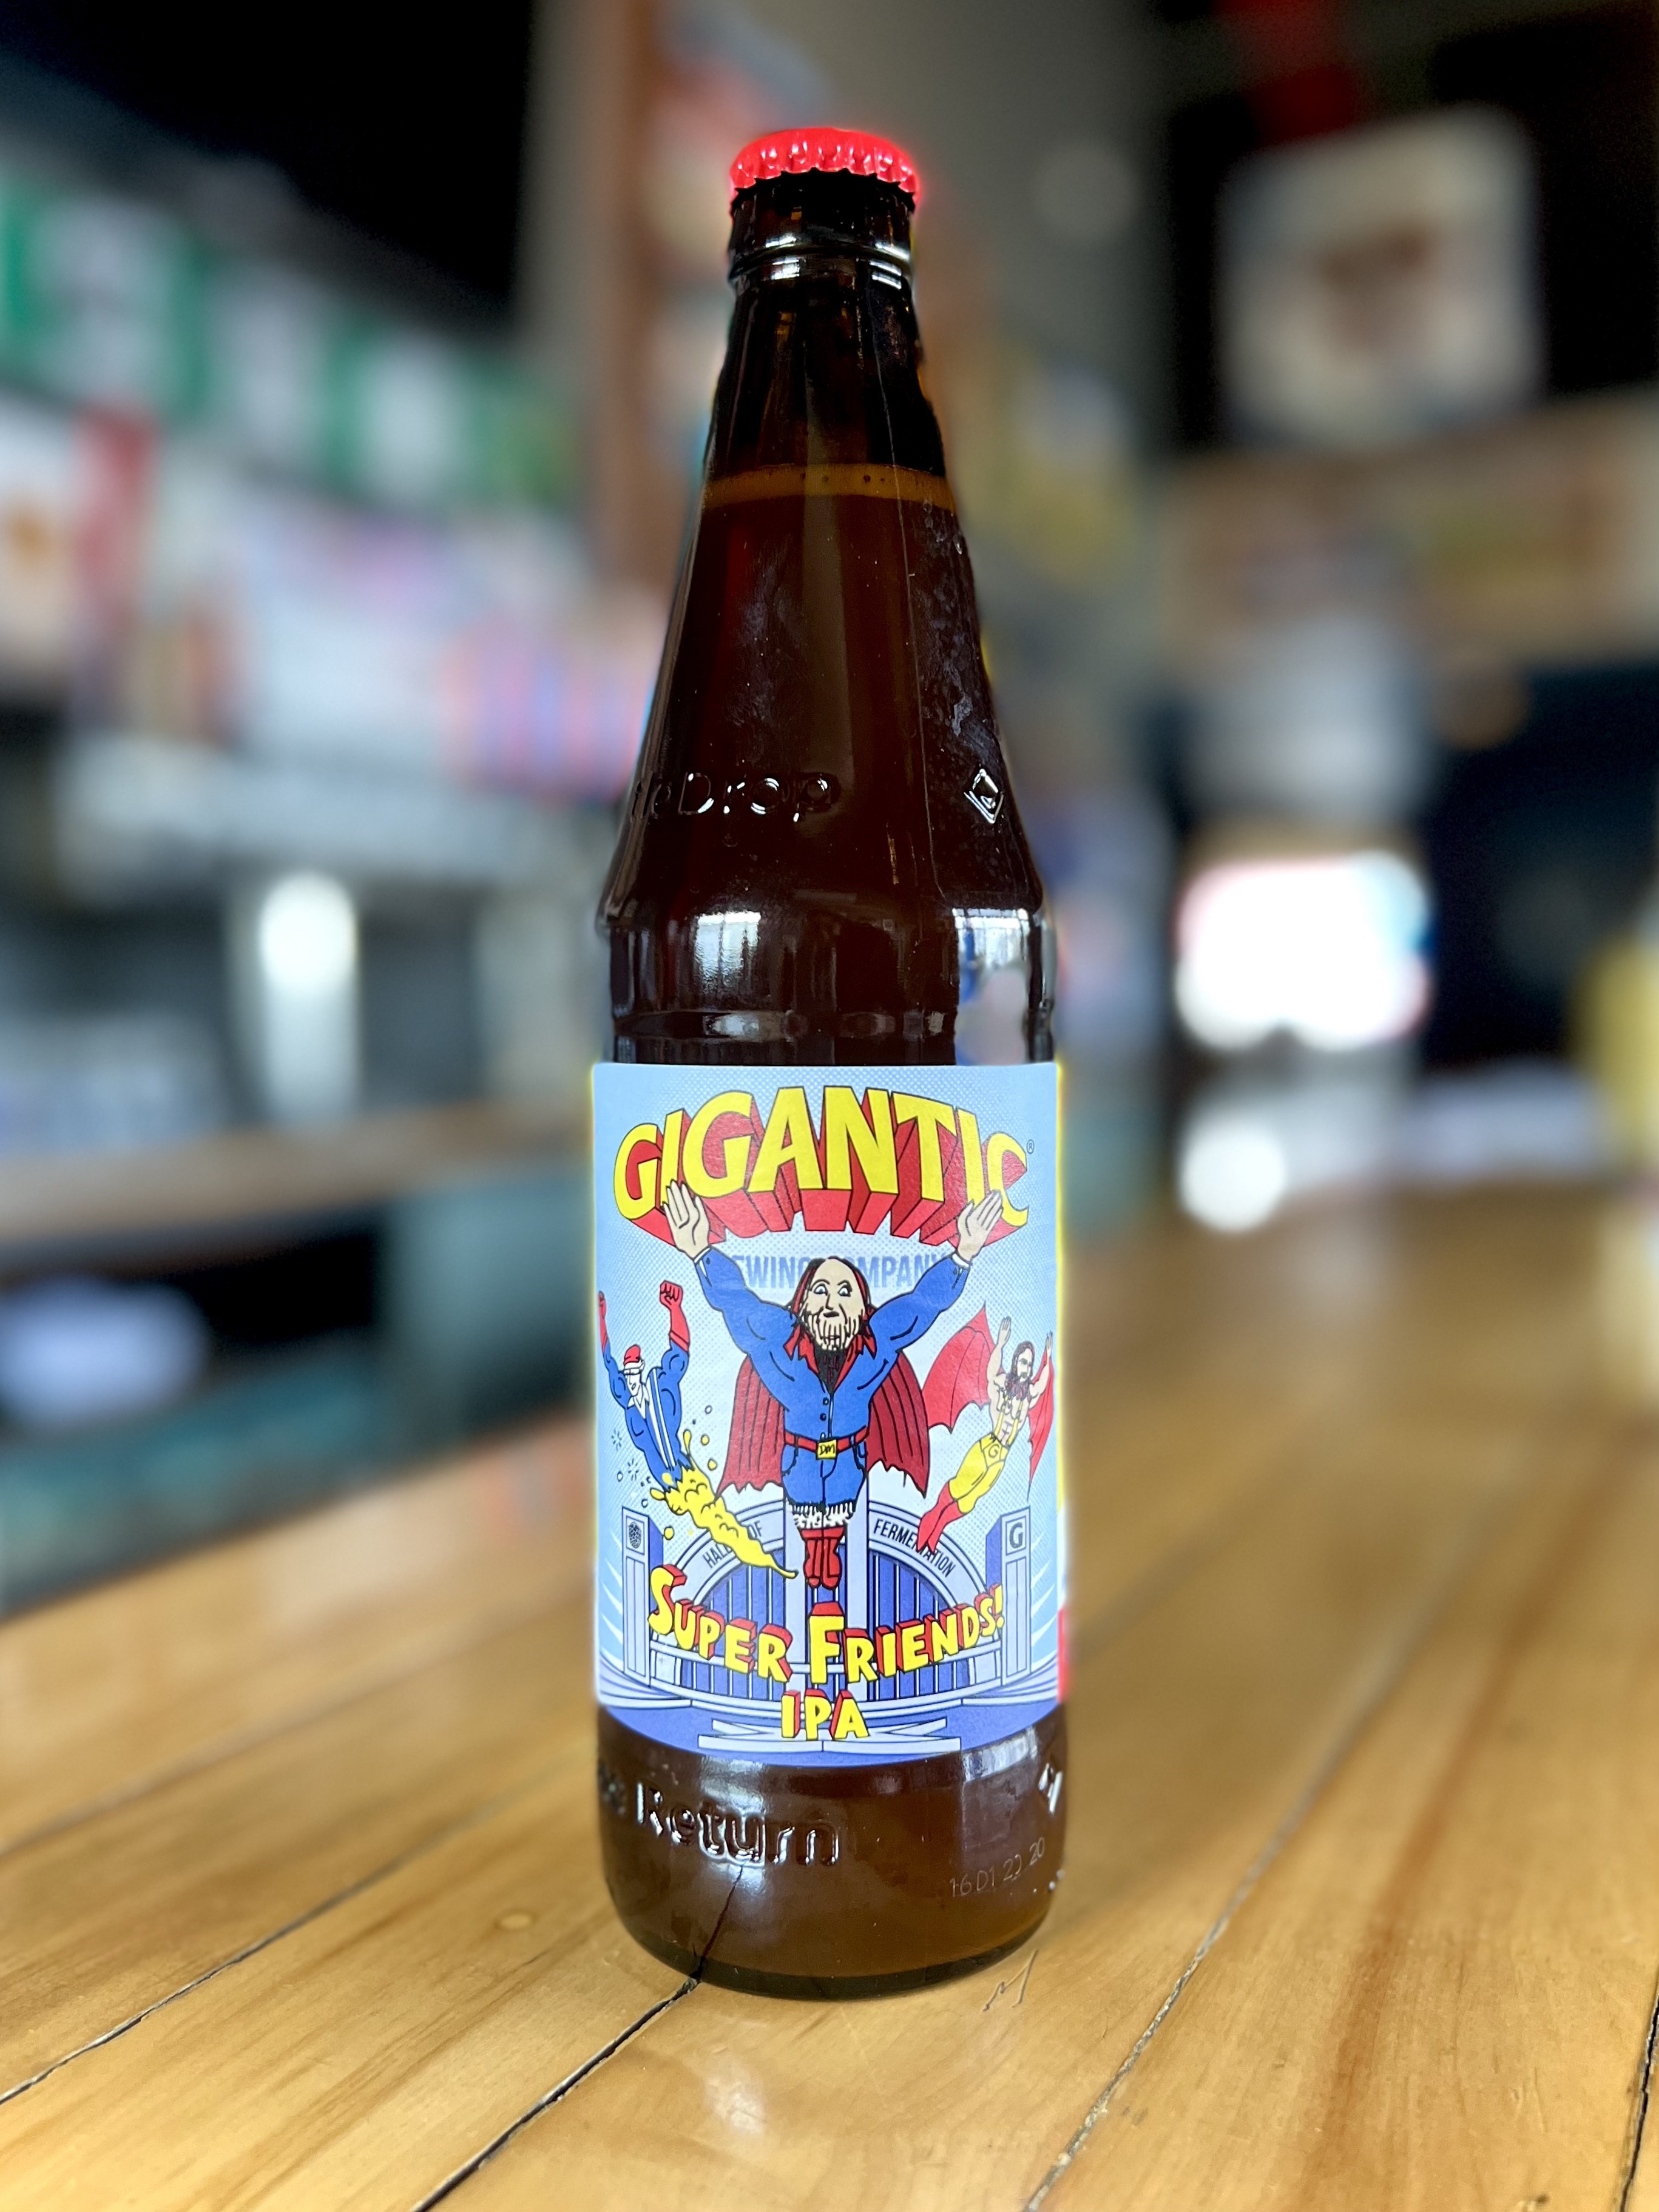 image of Super Friends IPA, a collaboration from Gigantic Brewing and Double Mountain Brewery courtesy of Gigantic Brewing